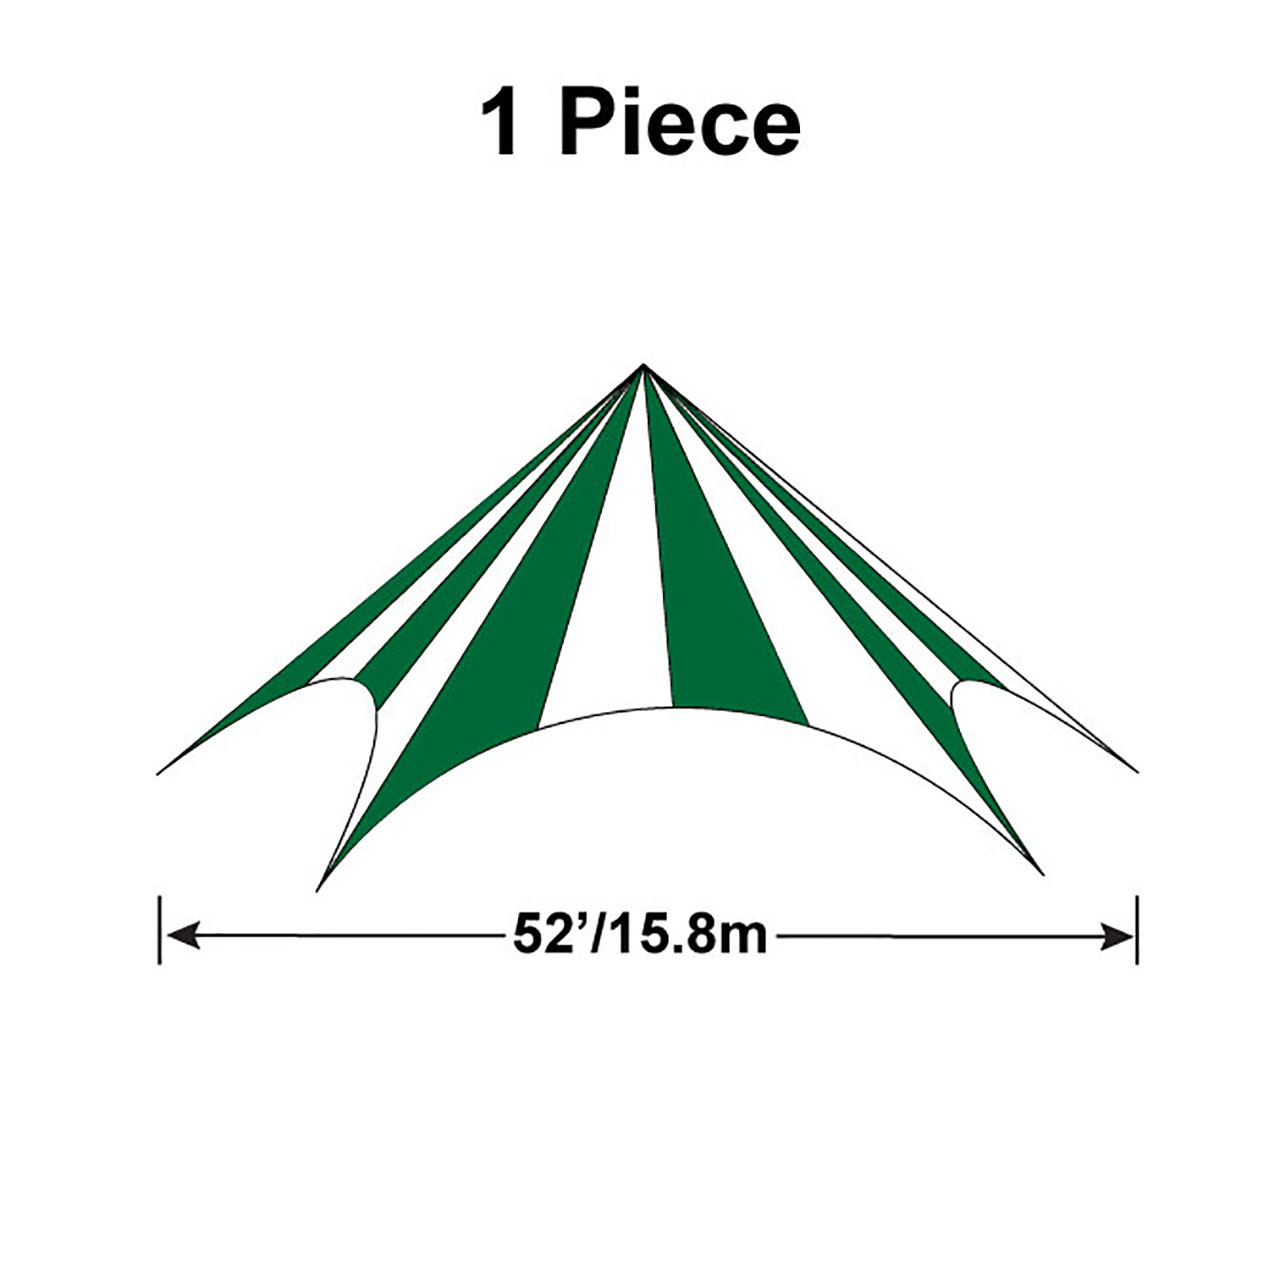 52' Diameter TP/Hexagon Tent, 1 Piece, 16oz. Ratchet Top, White and Forest Green